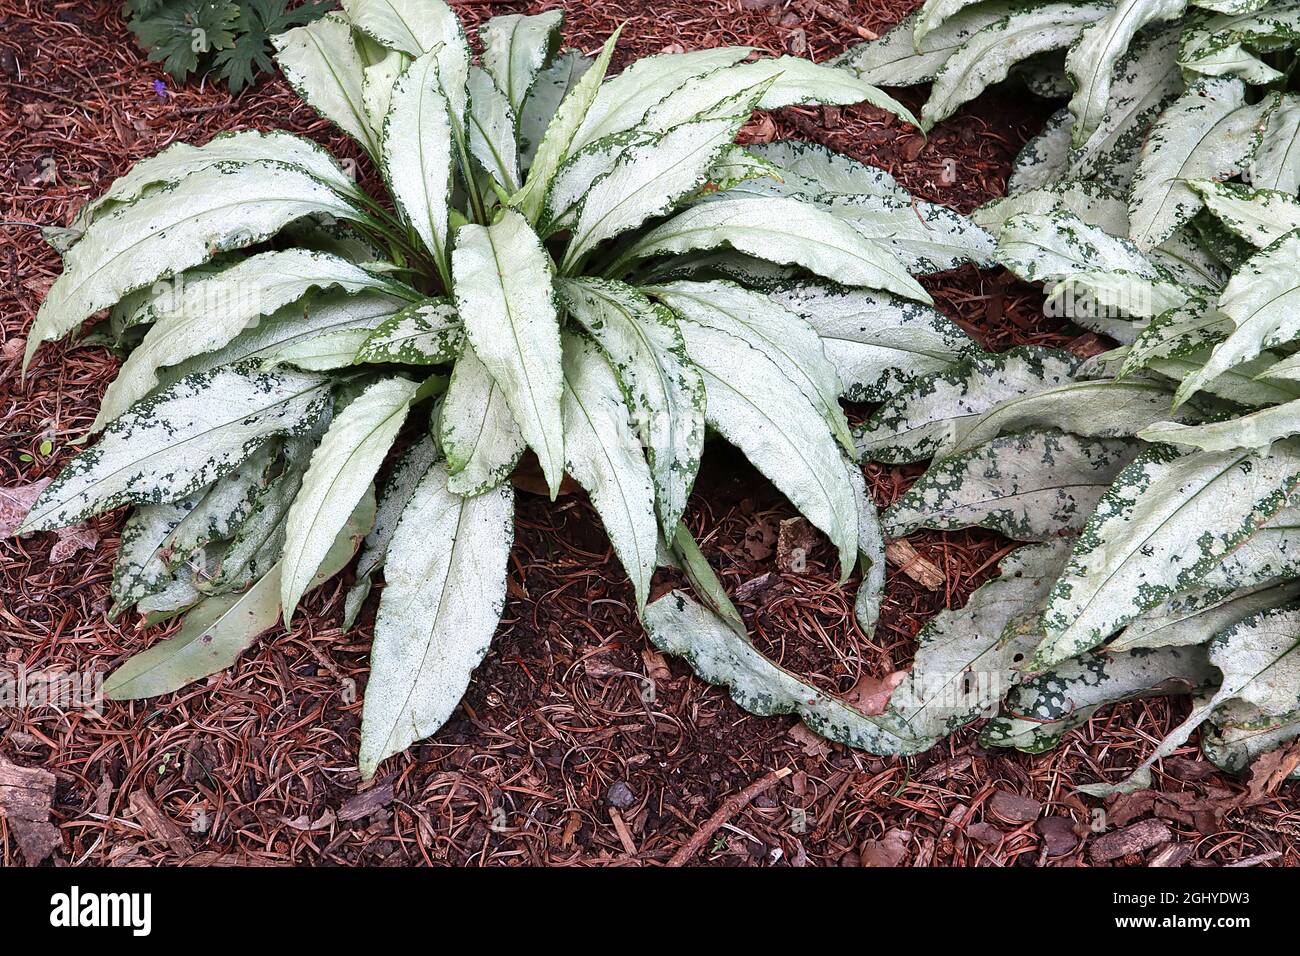 Pulmonaria ‘Silver Bouquet’ lungwort Silver Bouquet – heavily frosted dark green arching leaves,  August, England, UK Stock Photo